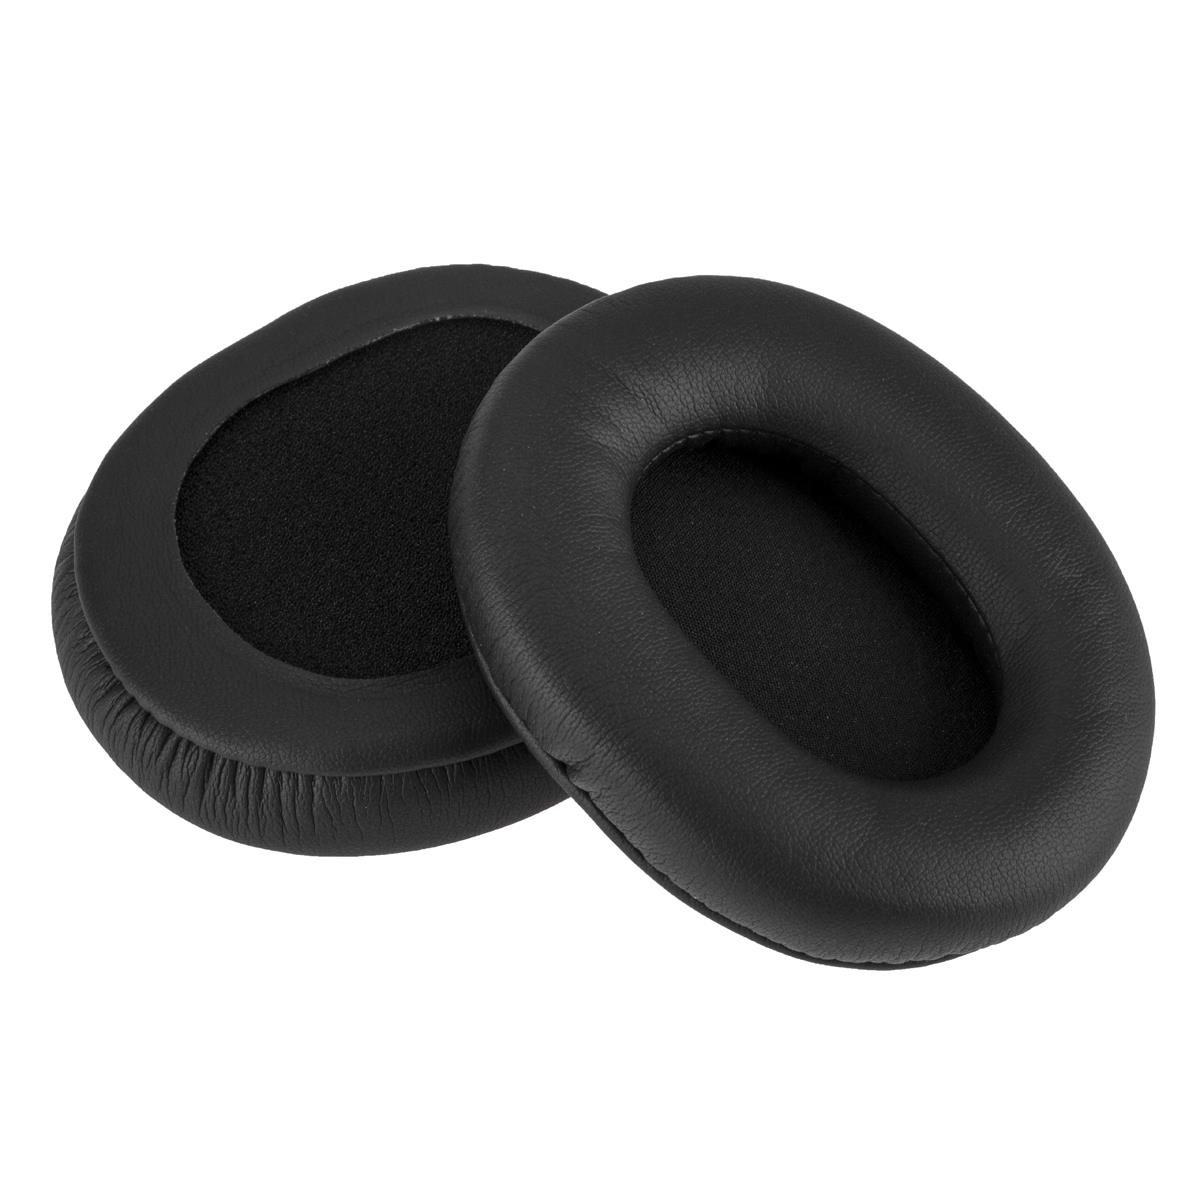 Image of H&amp;A High Frequency Leather Earpads for Audio Technica ATH-M50 Headphones